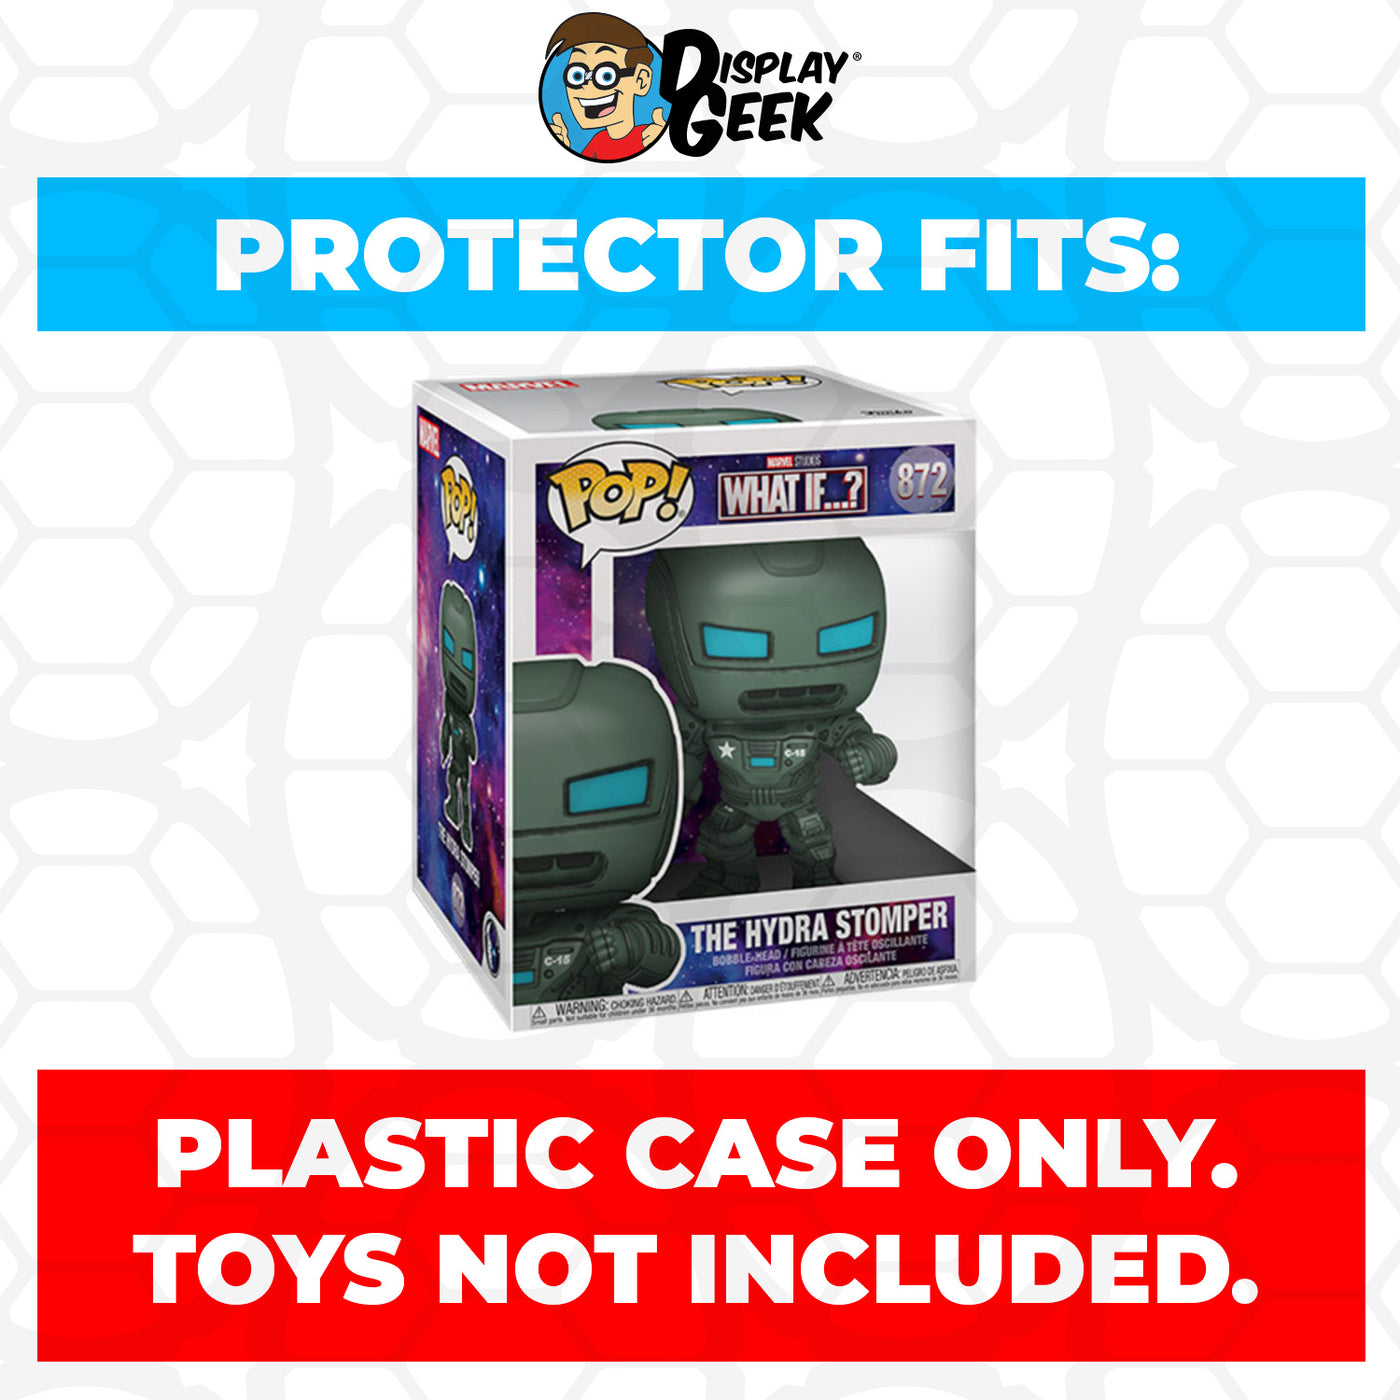 Pop Protector for 6 inch The Hydra Stomper #872 Super Size Funko Pop on The Protector Guide App by Display Geek